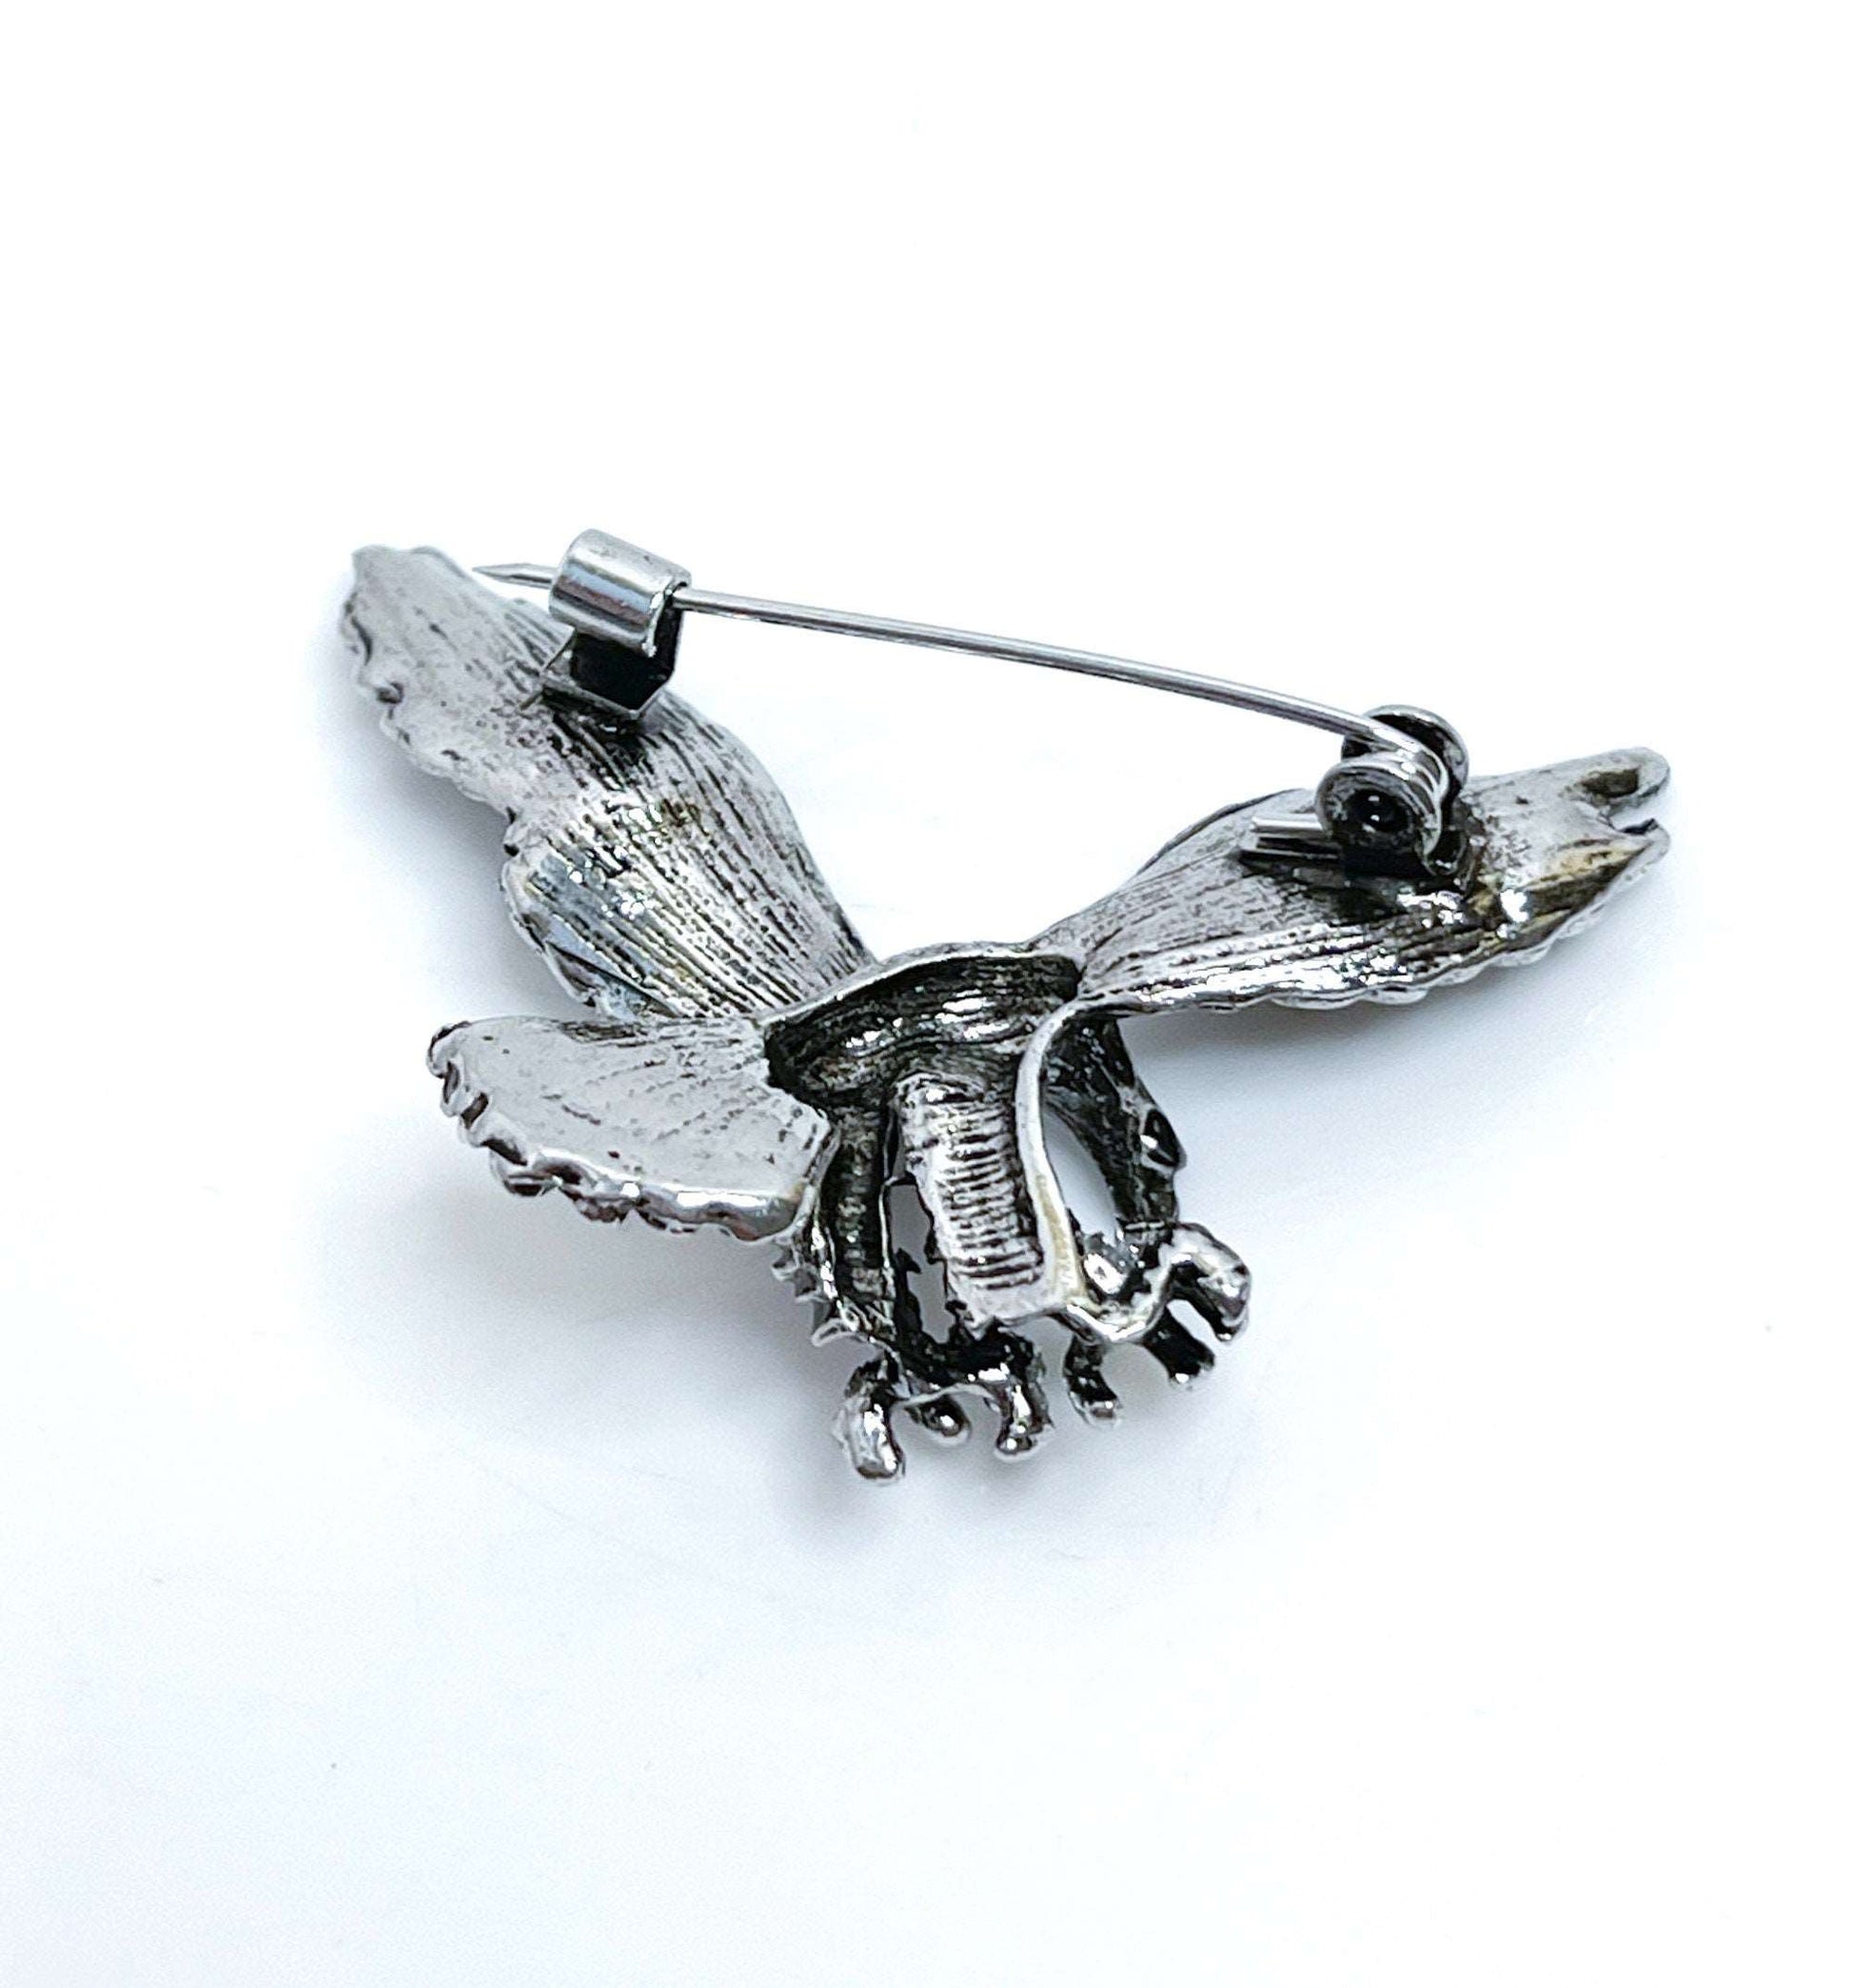 Antique Silver Swooping Eagle Brooch, Gothic Brooch, Unisex Jewellery, Vintage Style Bikers Pin, Rockers Pin, Flying Eagle Pin